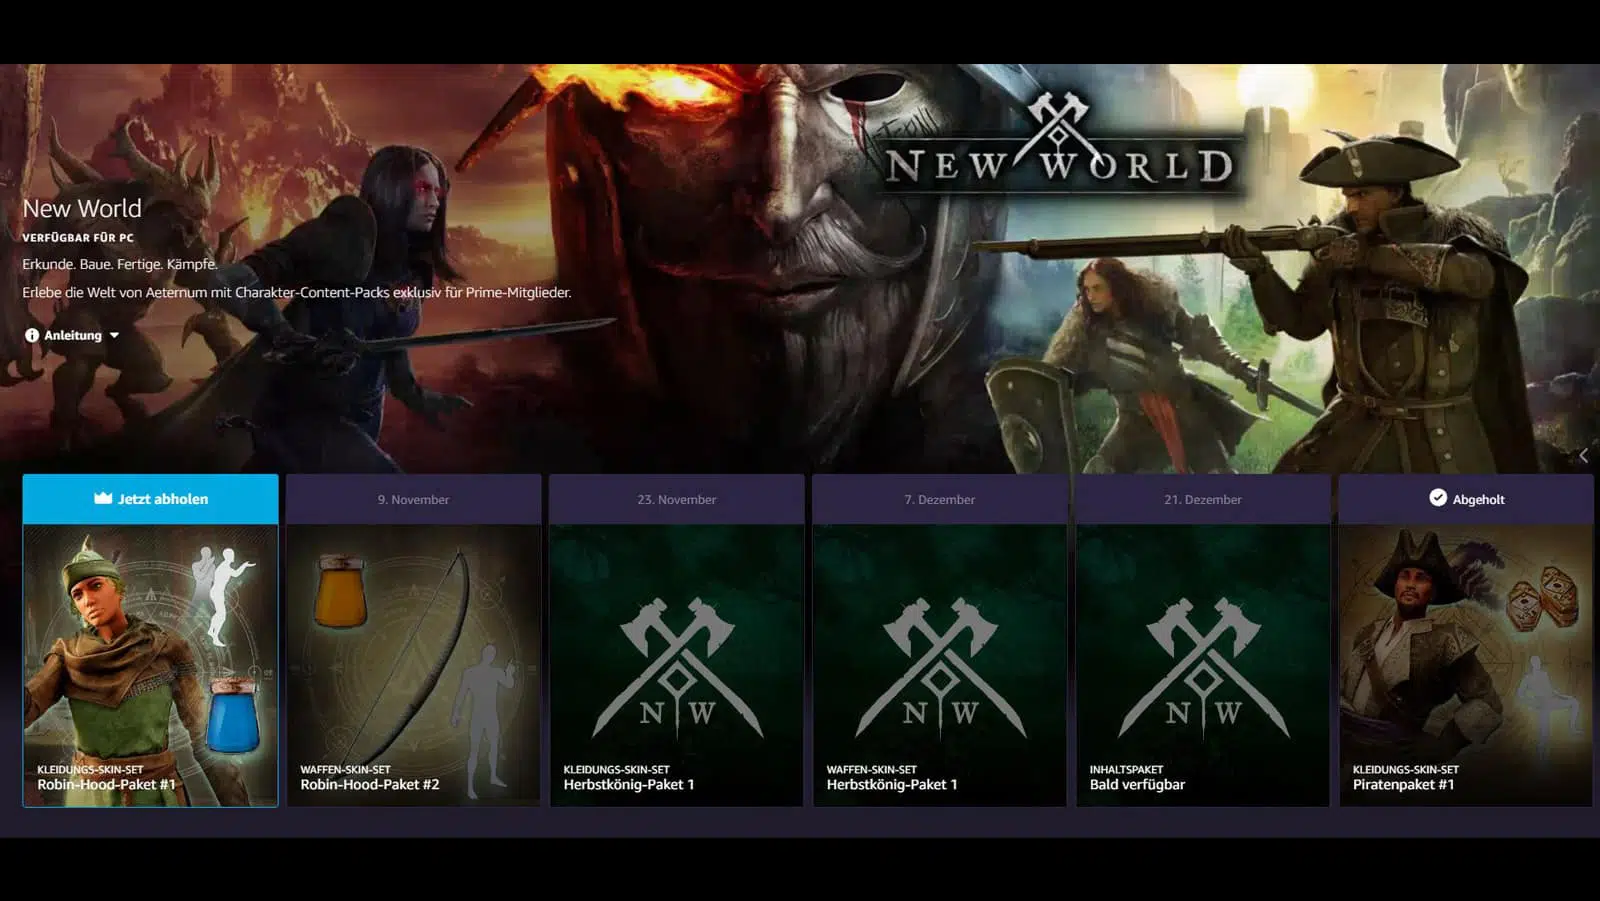 new world twitch prime pack 3